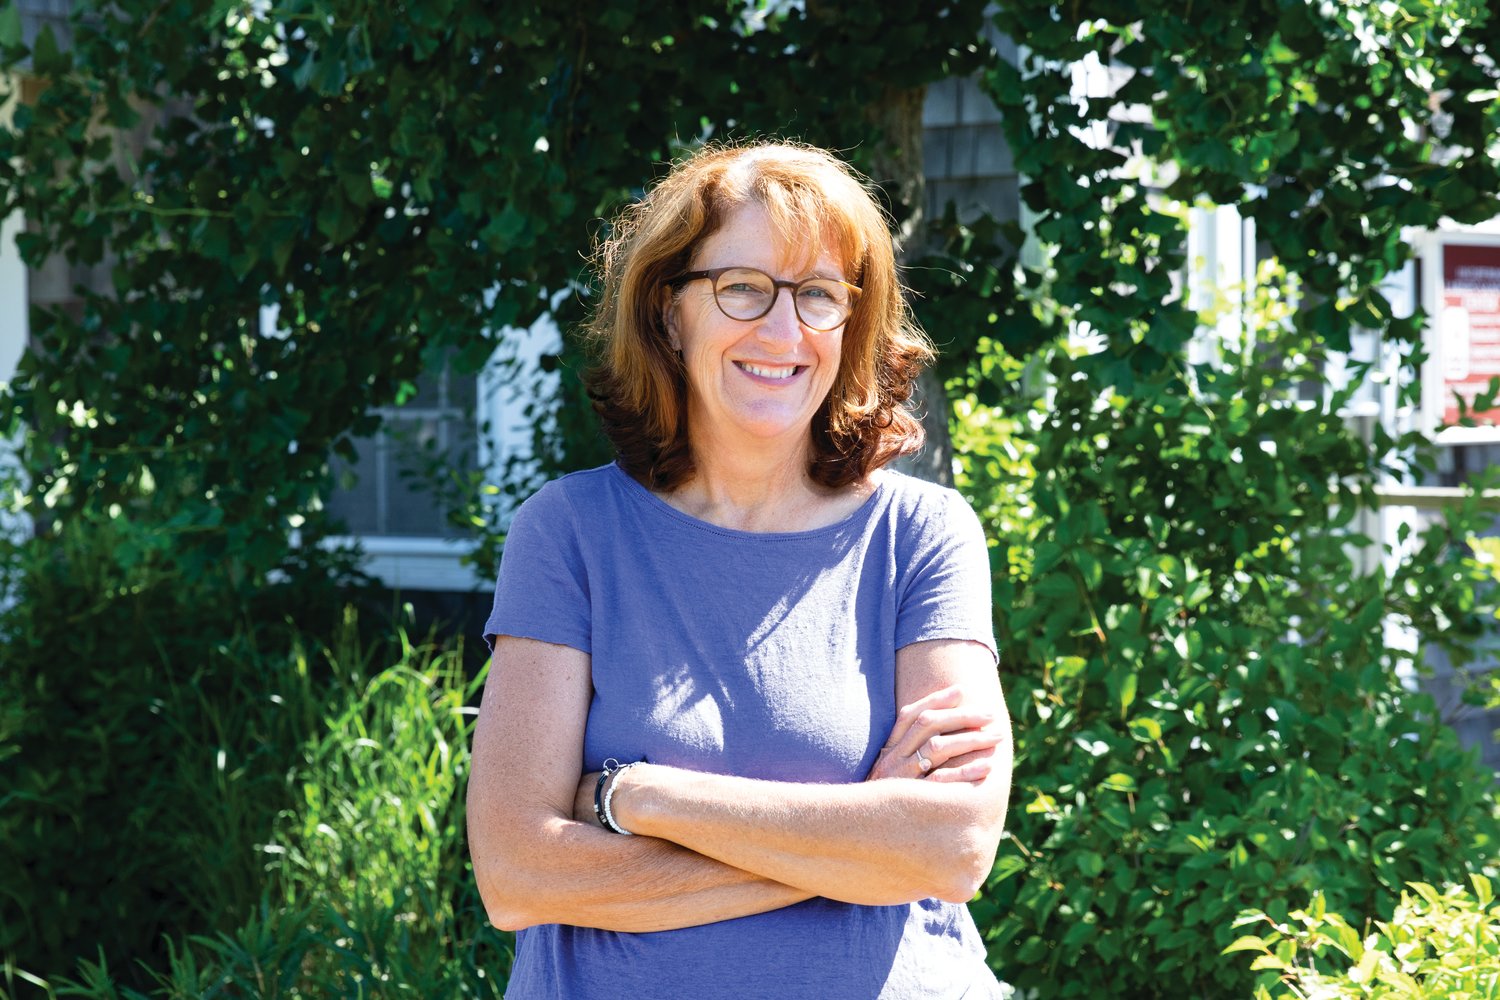 Karen Beattie’s 30-year tenure with the Nantucket Conservation Foundation coincides with the rise of science and research at the organization.